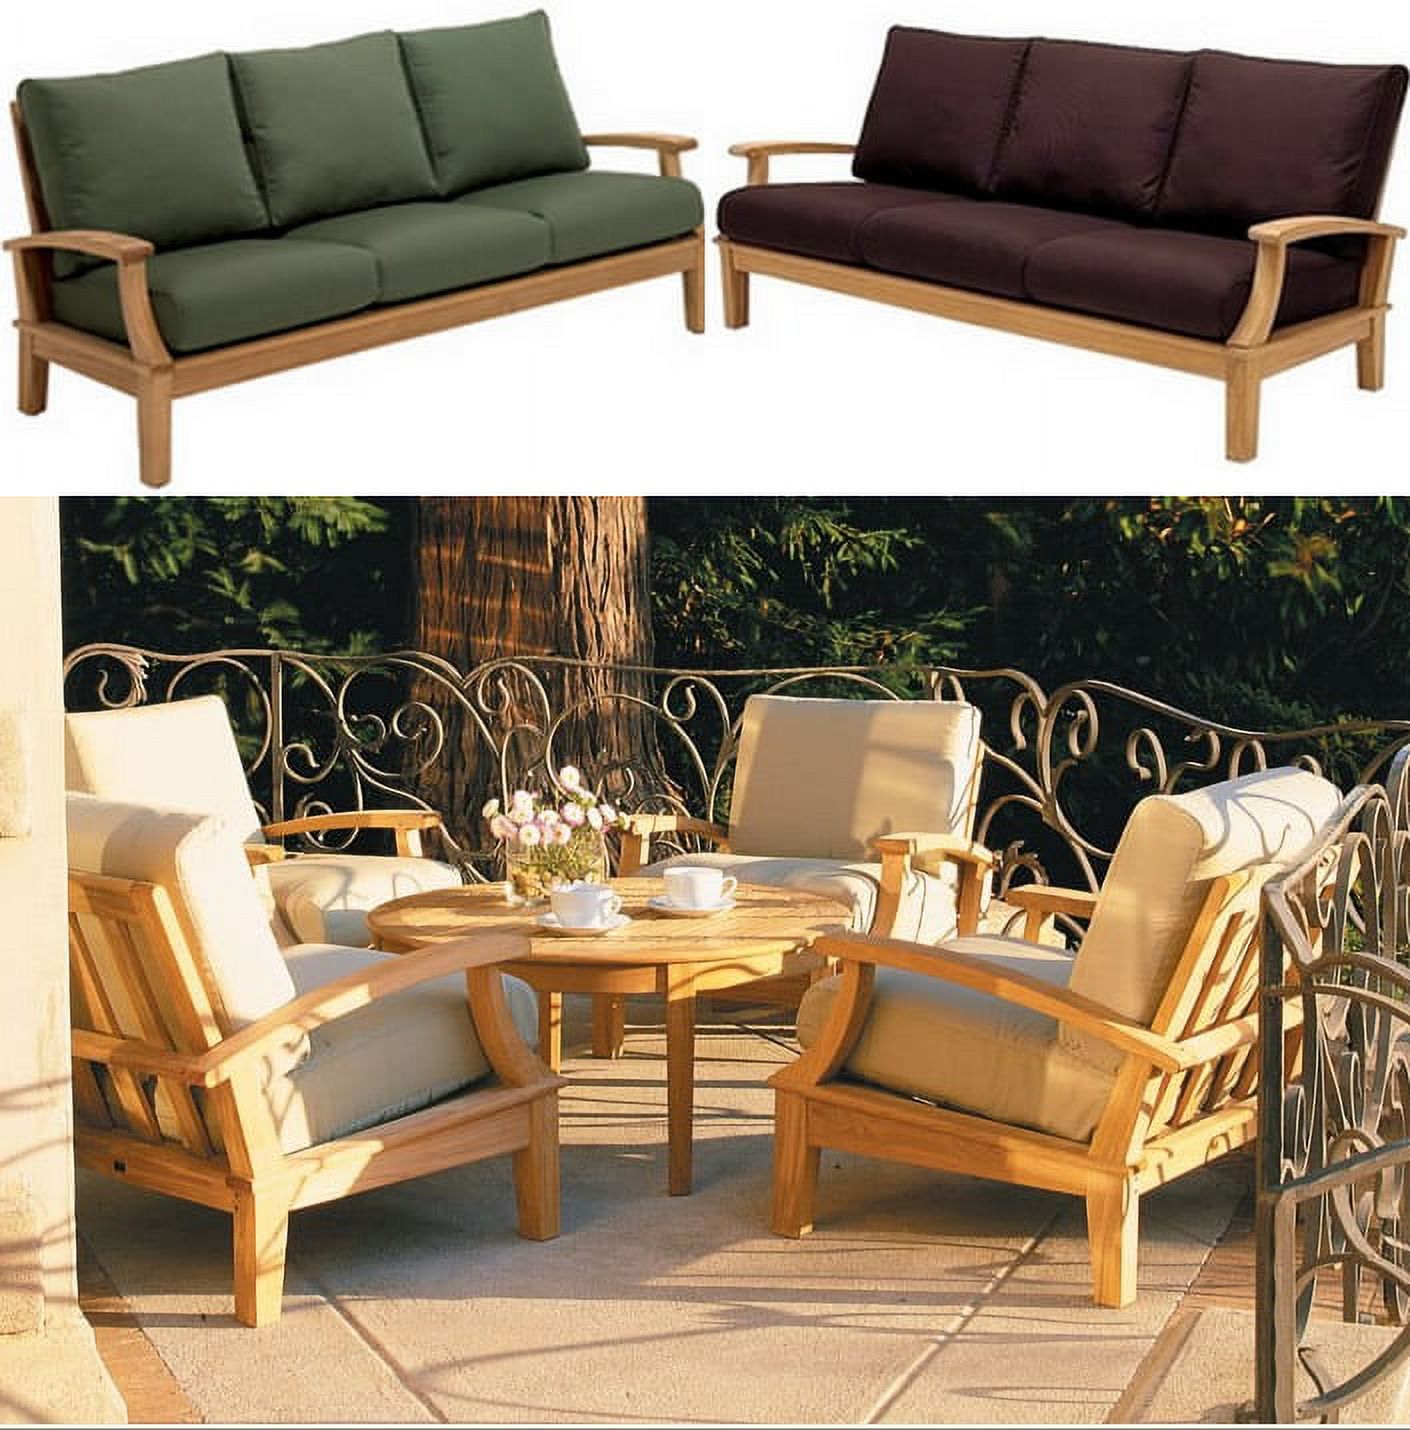 WholesaleTeak Outdoor Patio Grade-A Teak Wood 6 Piece Teak Sofa Set - 3-Seater Sofa, 2 Lounge Chairs, 2 Ottomans and 35" Round Coffee Table -Furniture only --Somer Collection #WMSSSA5 - image 1 of 5